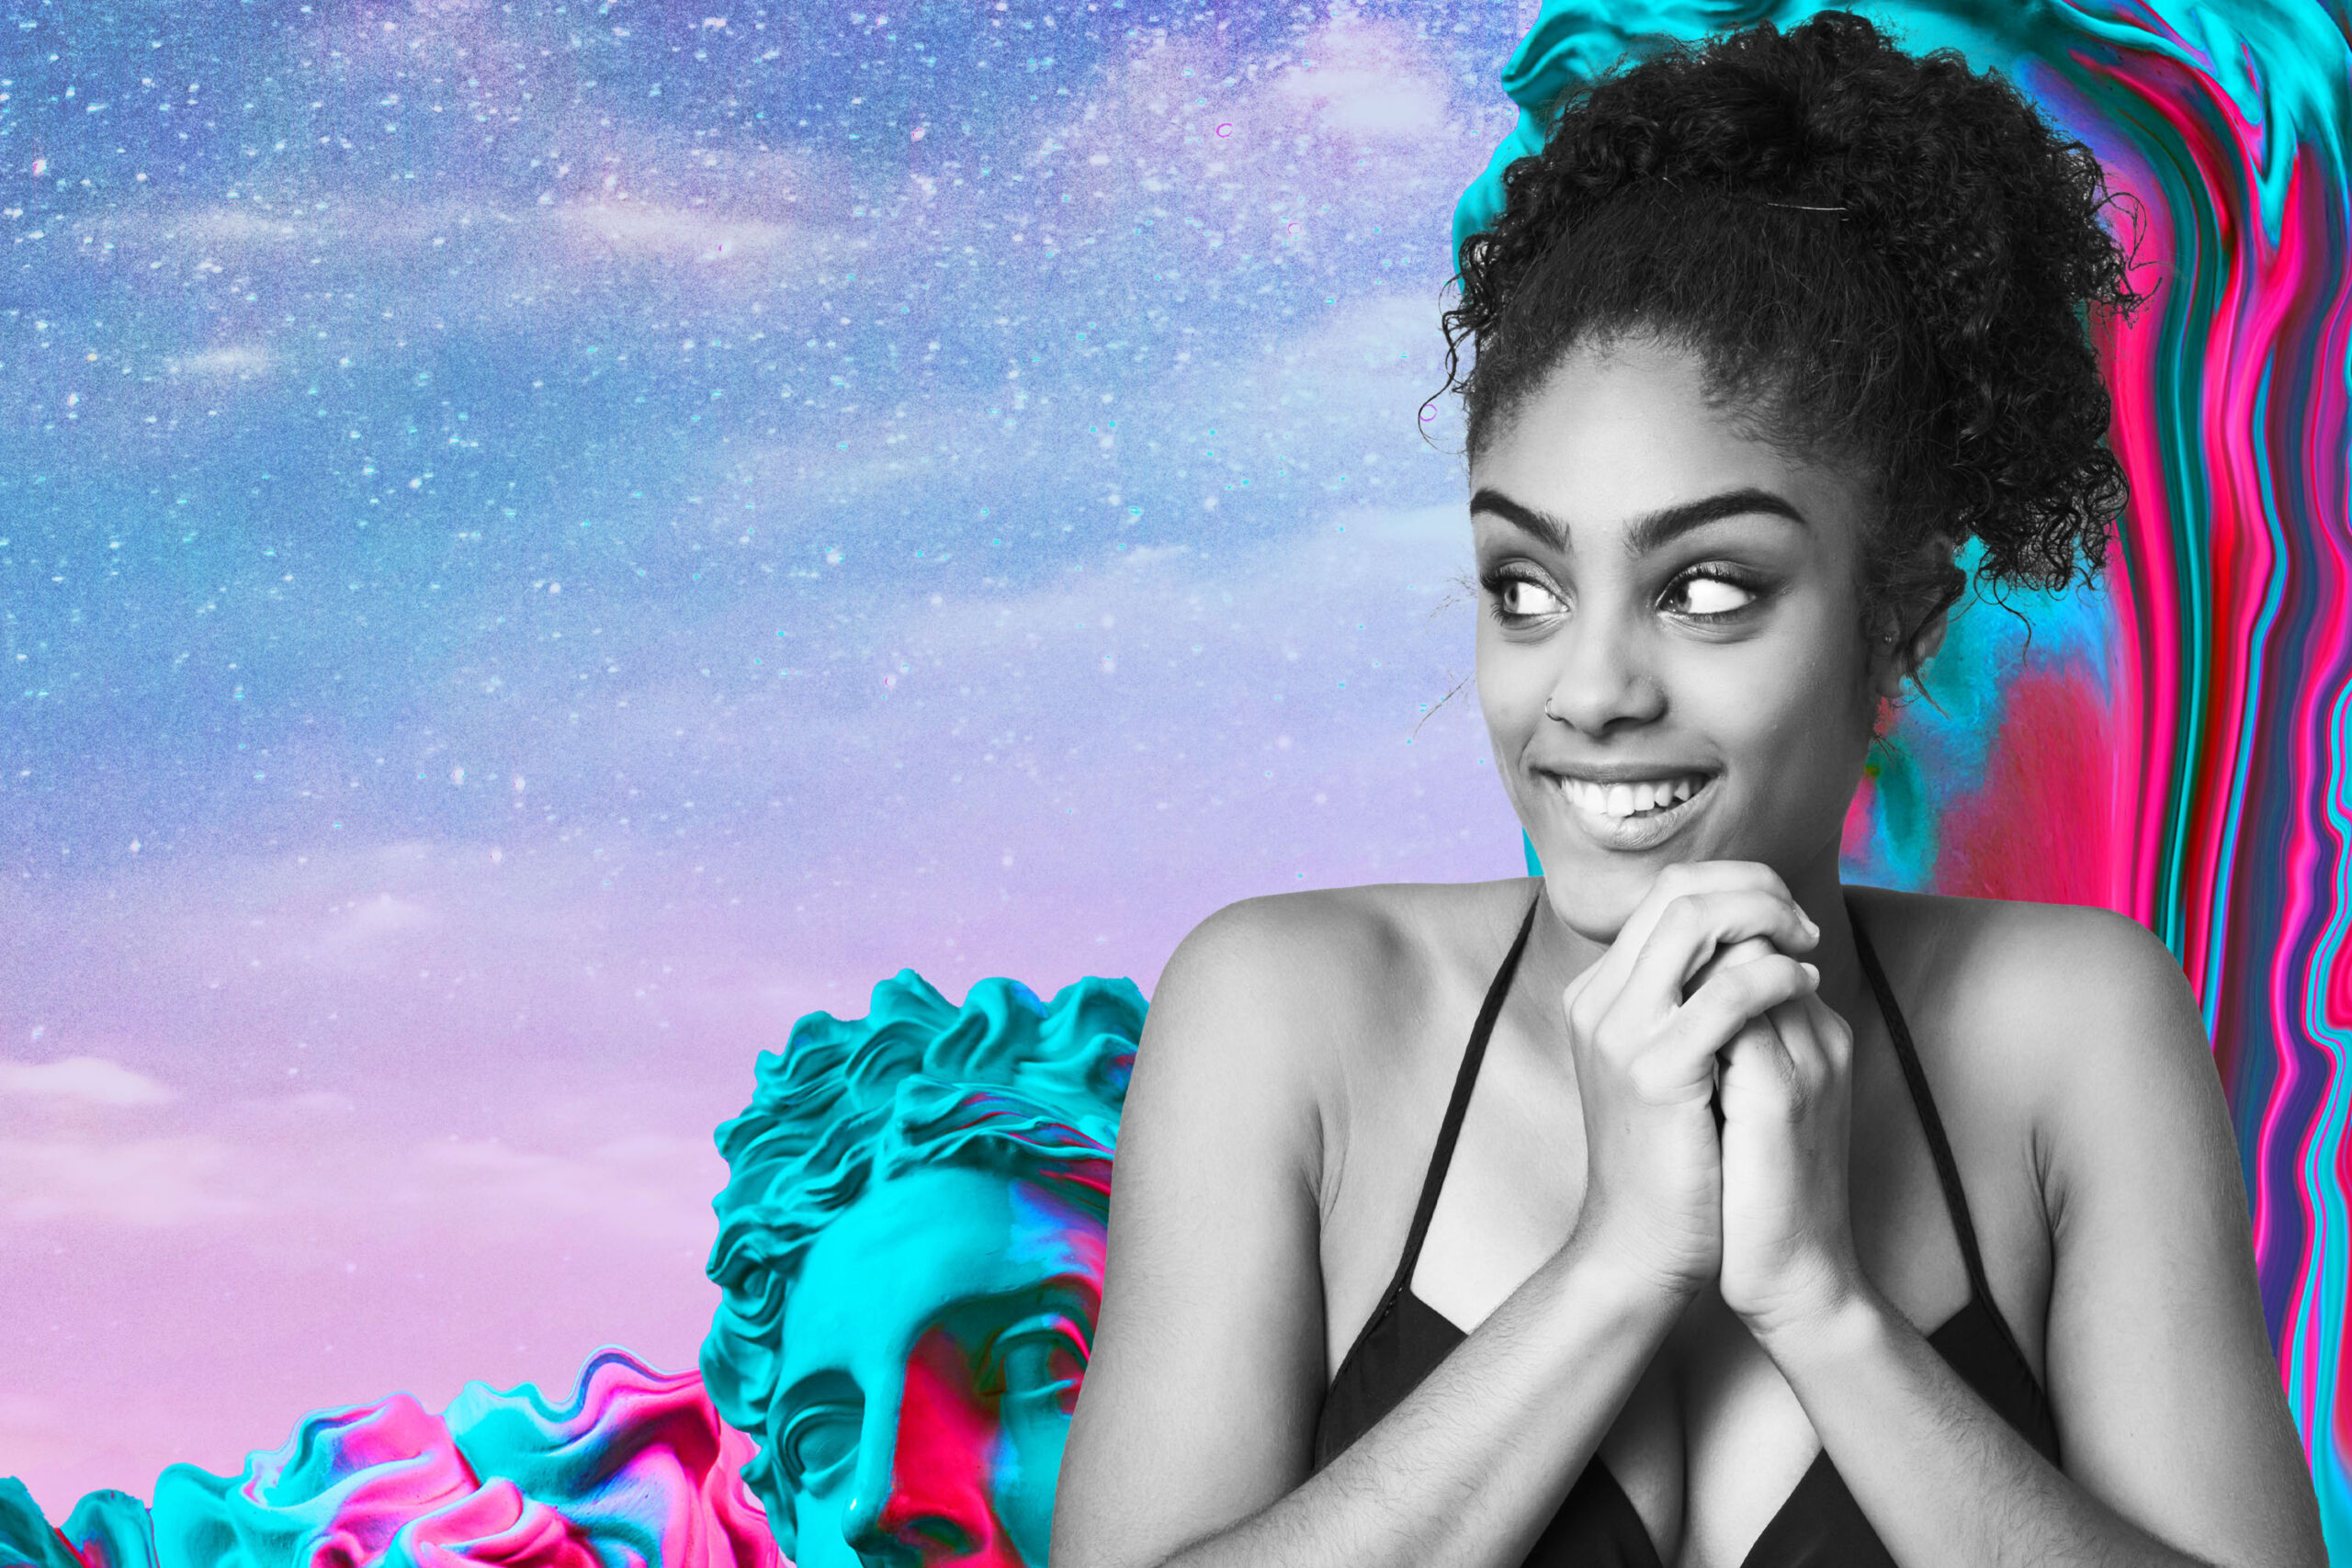 A black girl looking hopeful against a virtual reality background of statues and cosmos